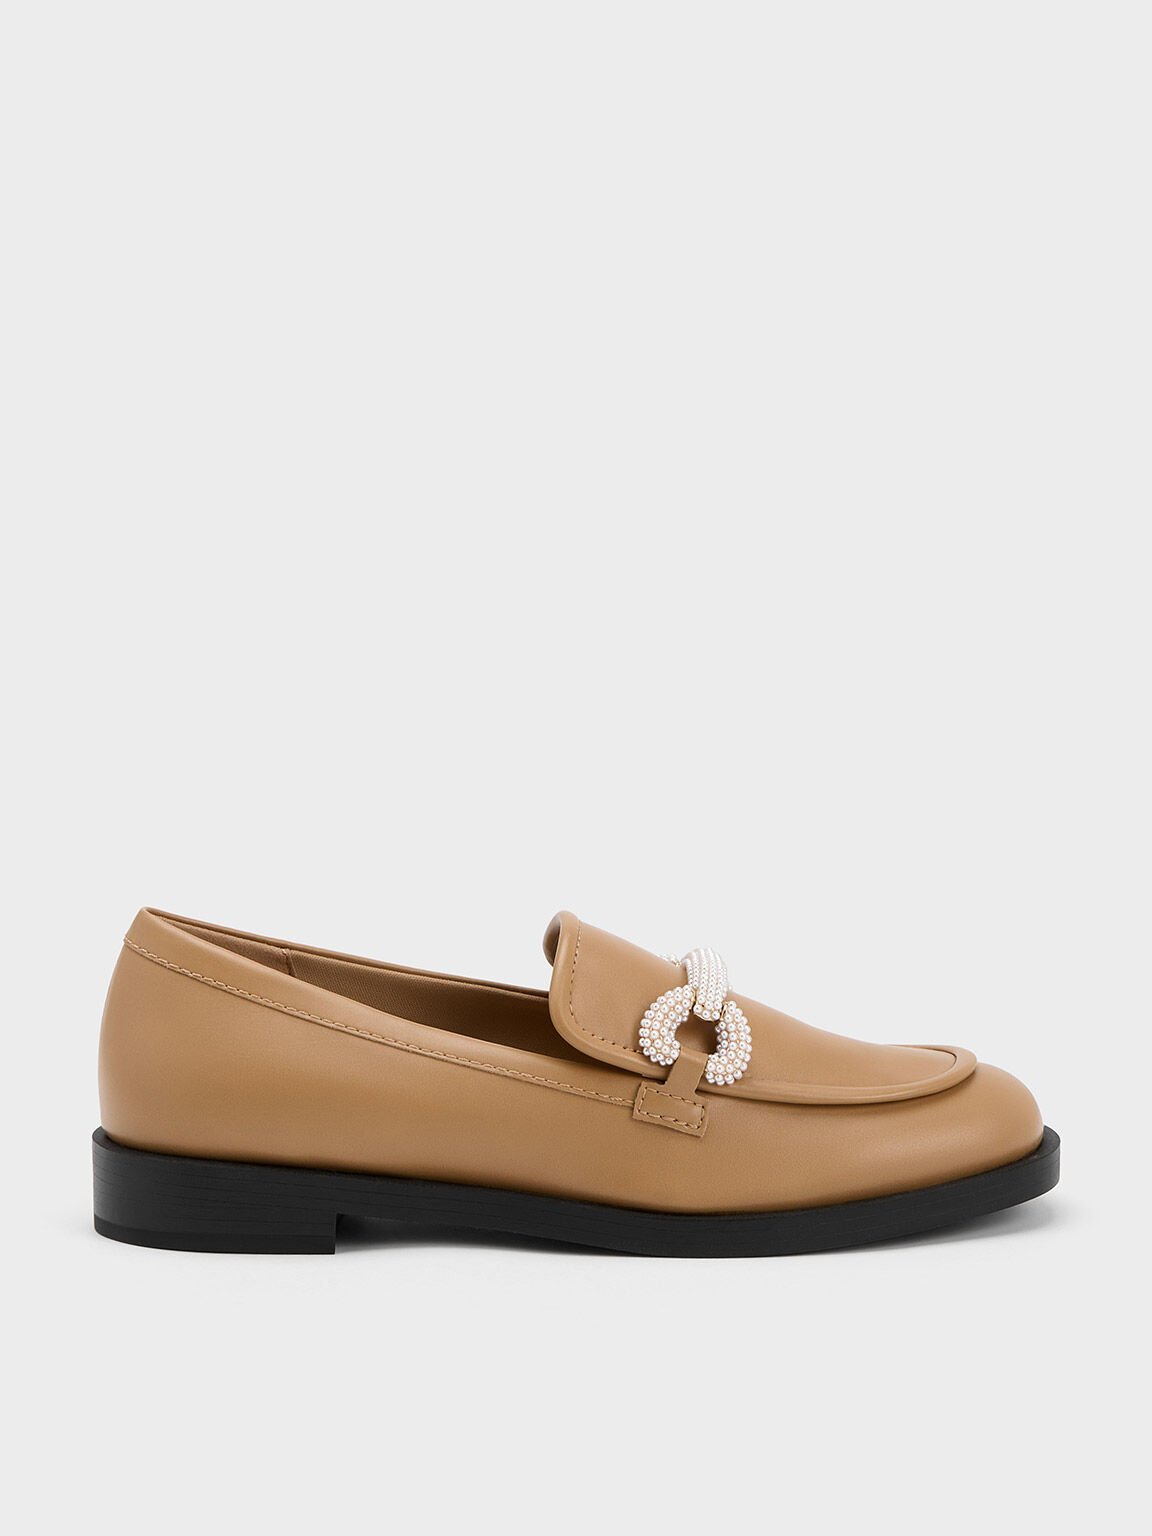 Beaded Strap Loafers, Camel, hi-res